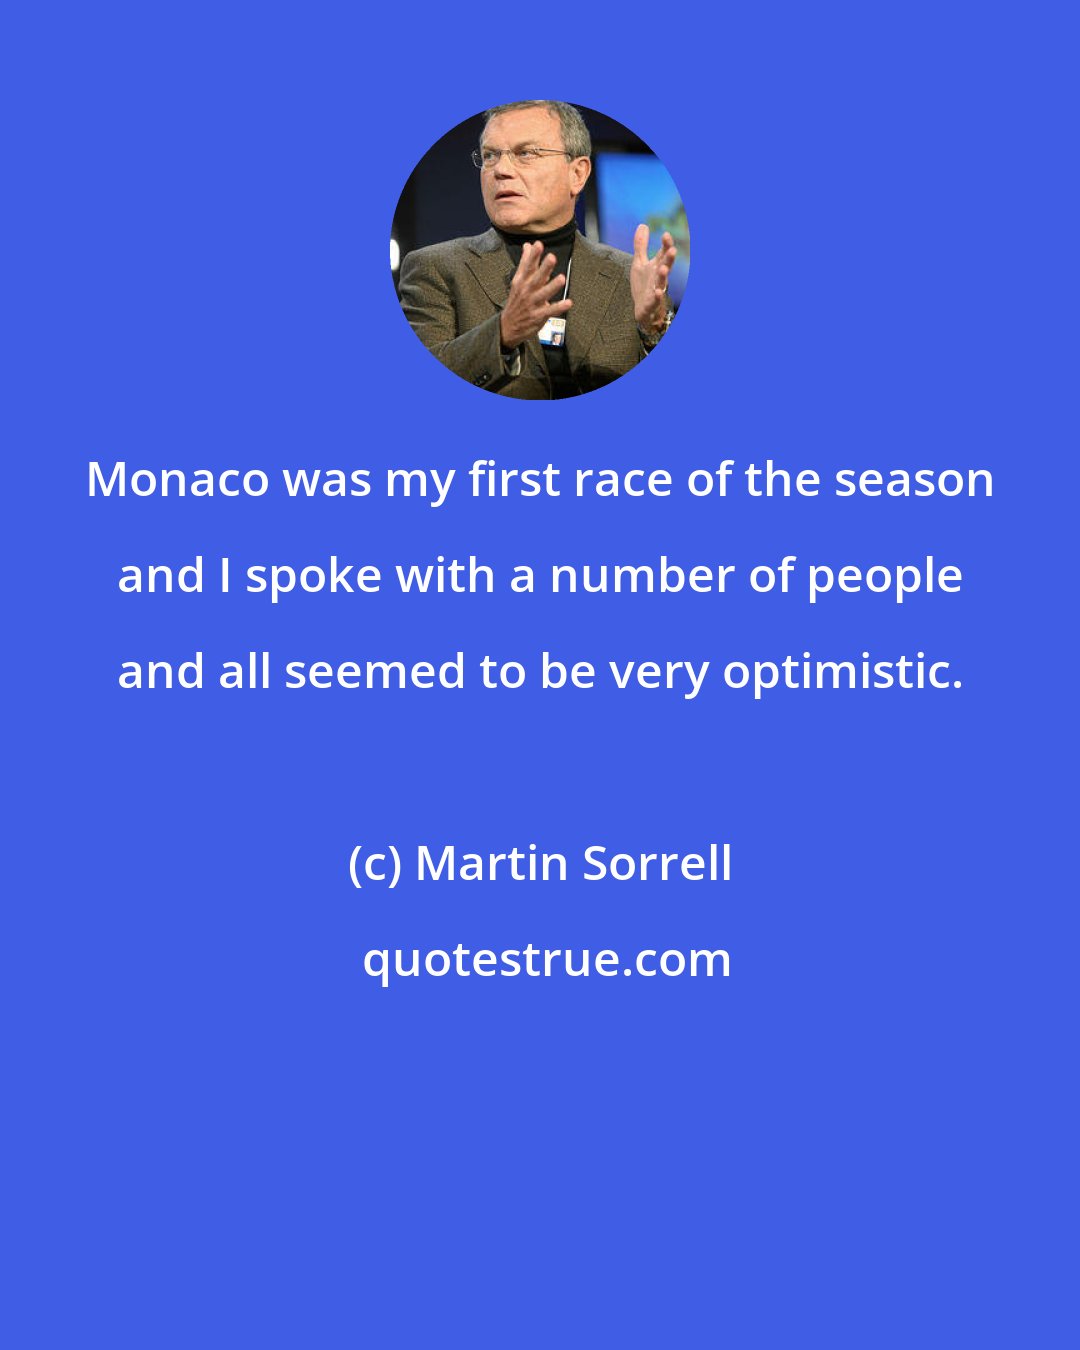 Martin Sorrell: Monaco was my first race of the season and I spoke with a number of people and all seemed to be very optimistic.